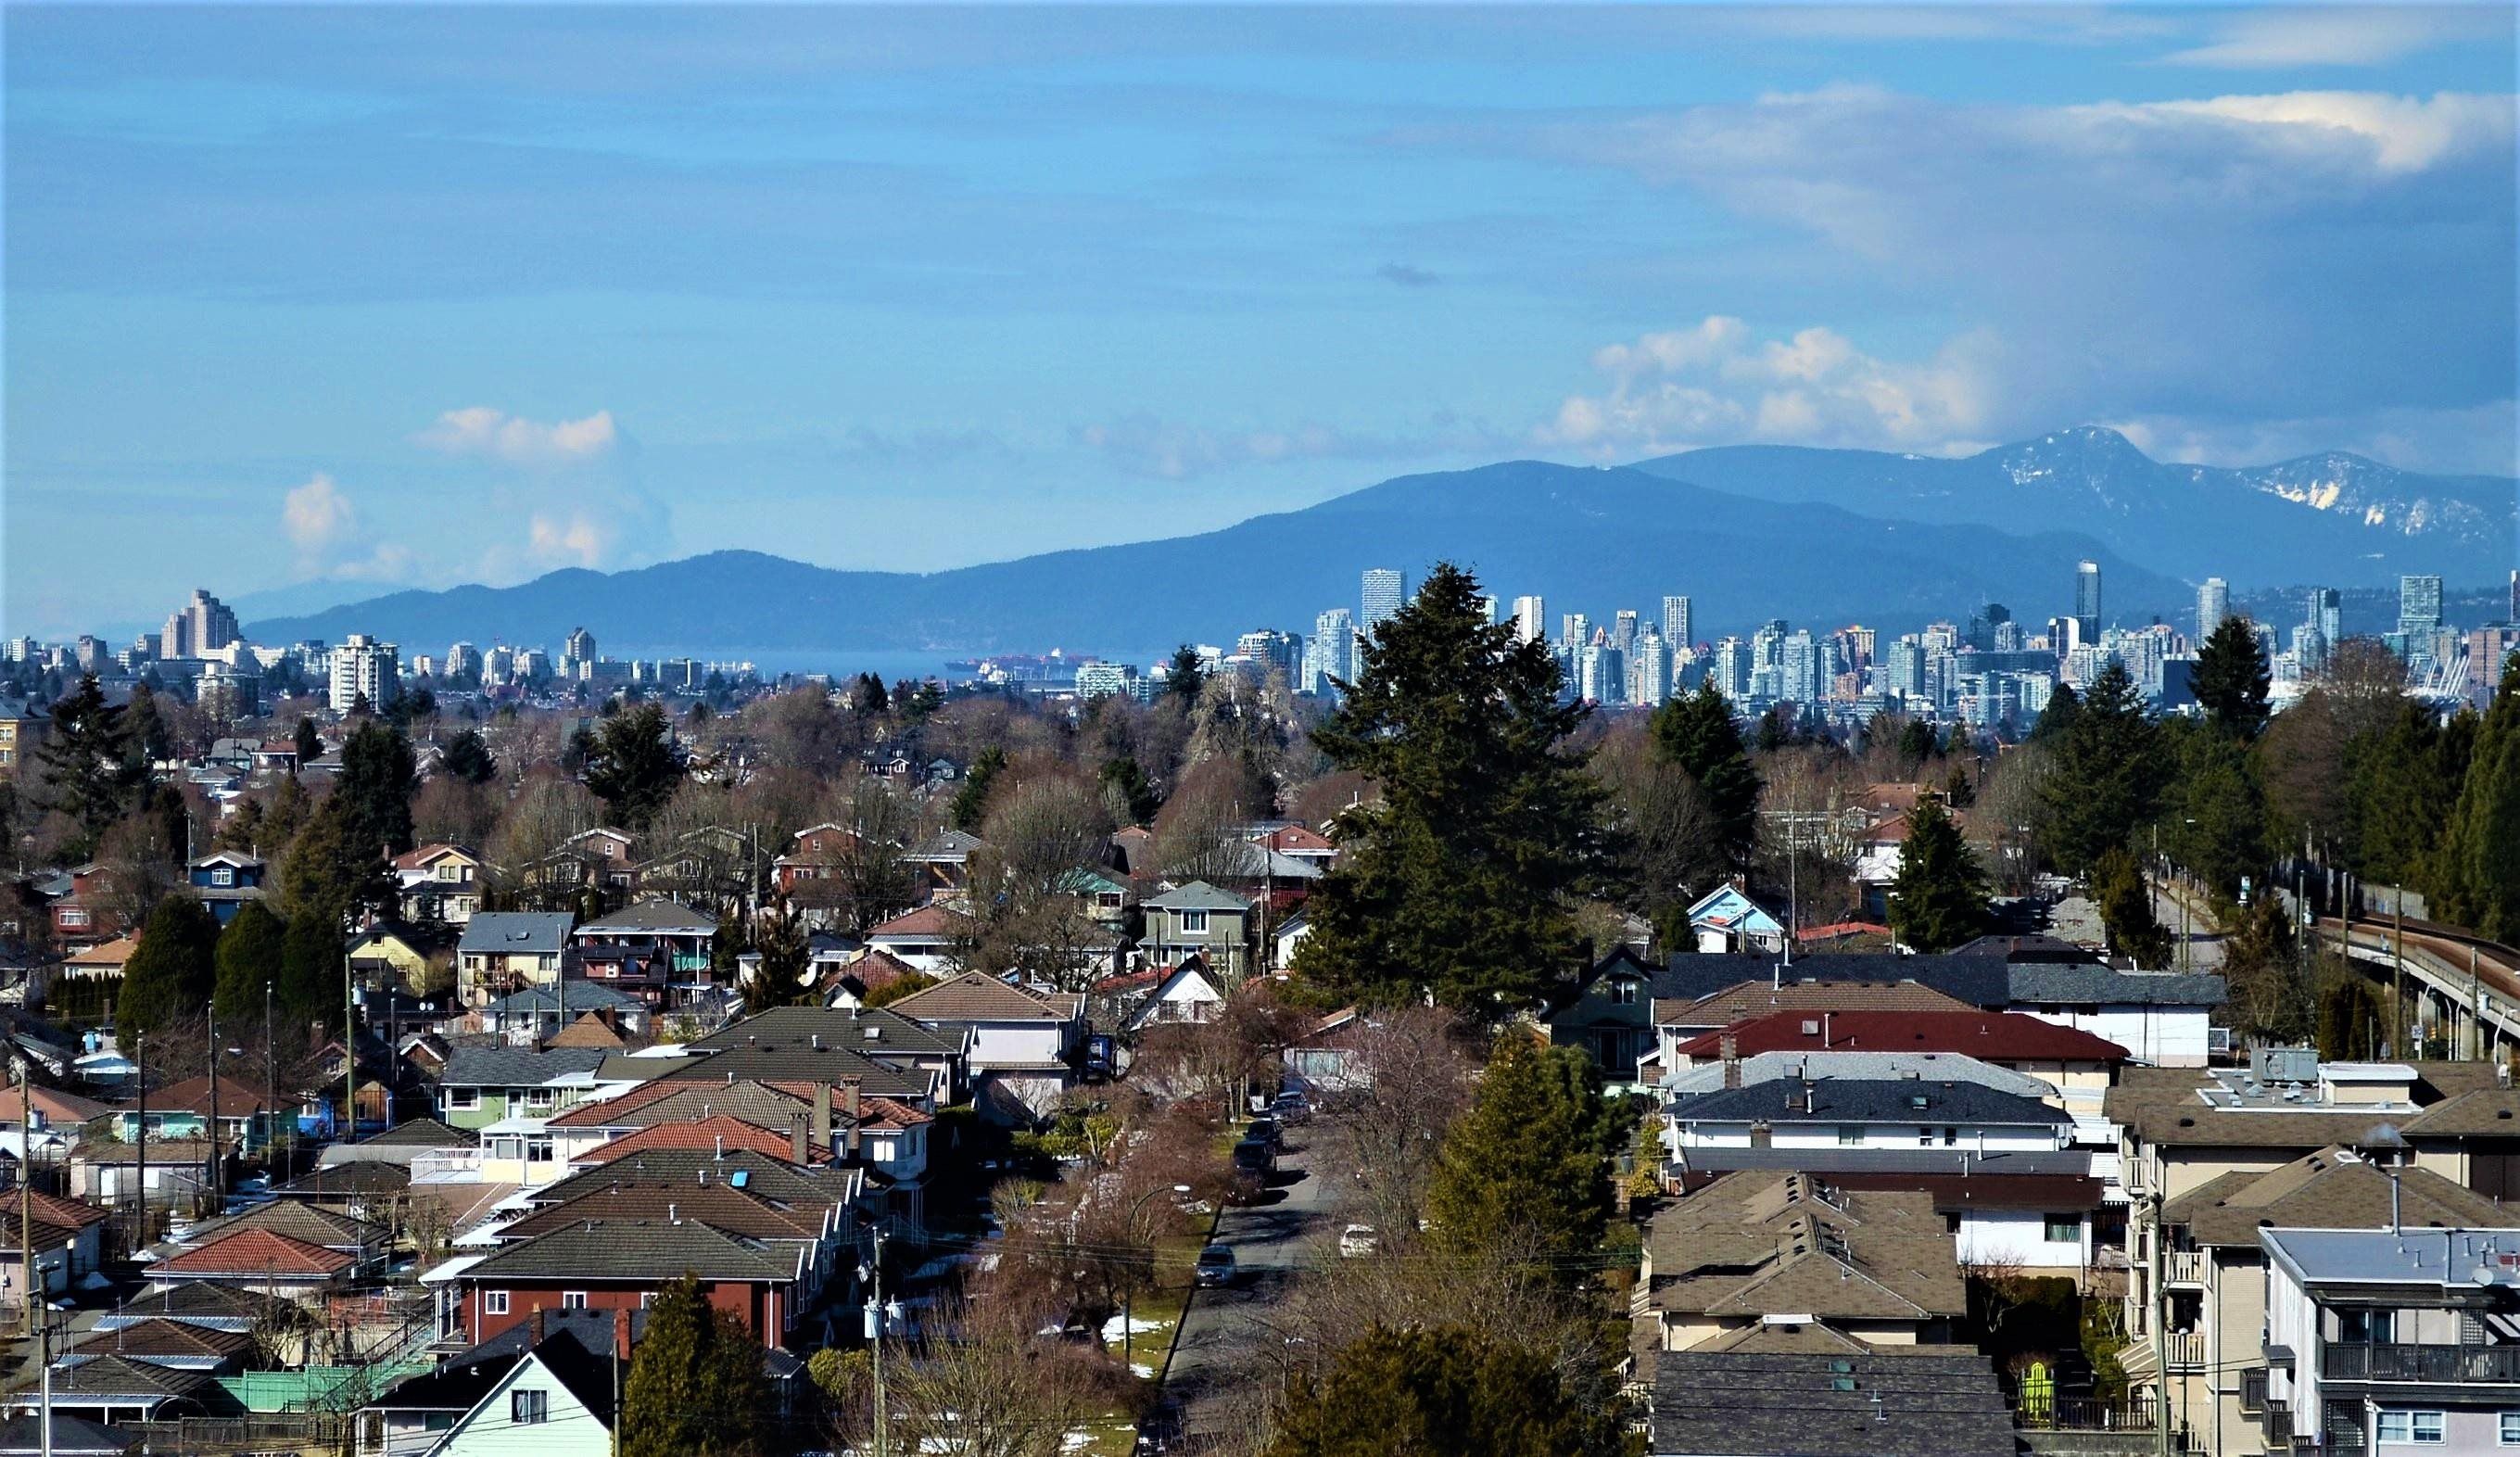 Nice view of Downtown and Mountains, can also see some ships in English Bay in the distance